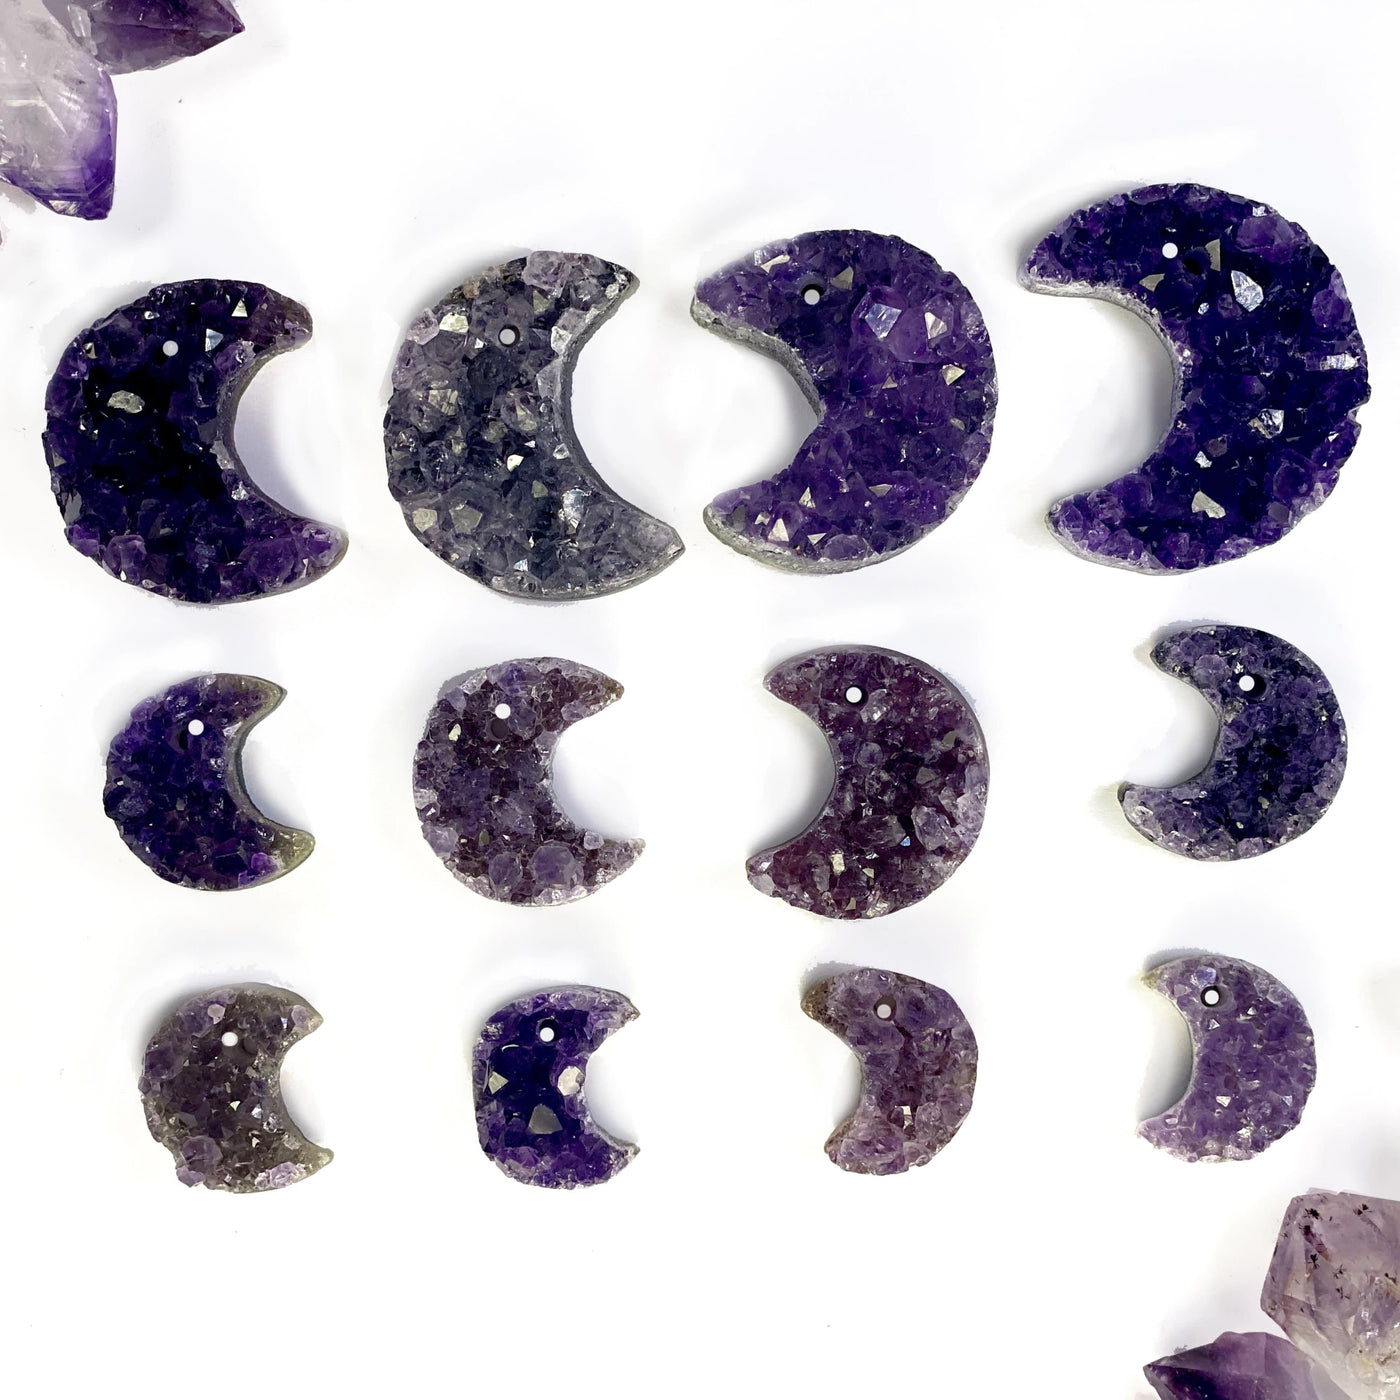 Amethyst cluster moons in assorted shades of purple to show how they vary. Also all three sizes are lined up in rows to compare them.